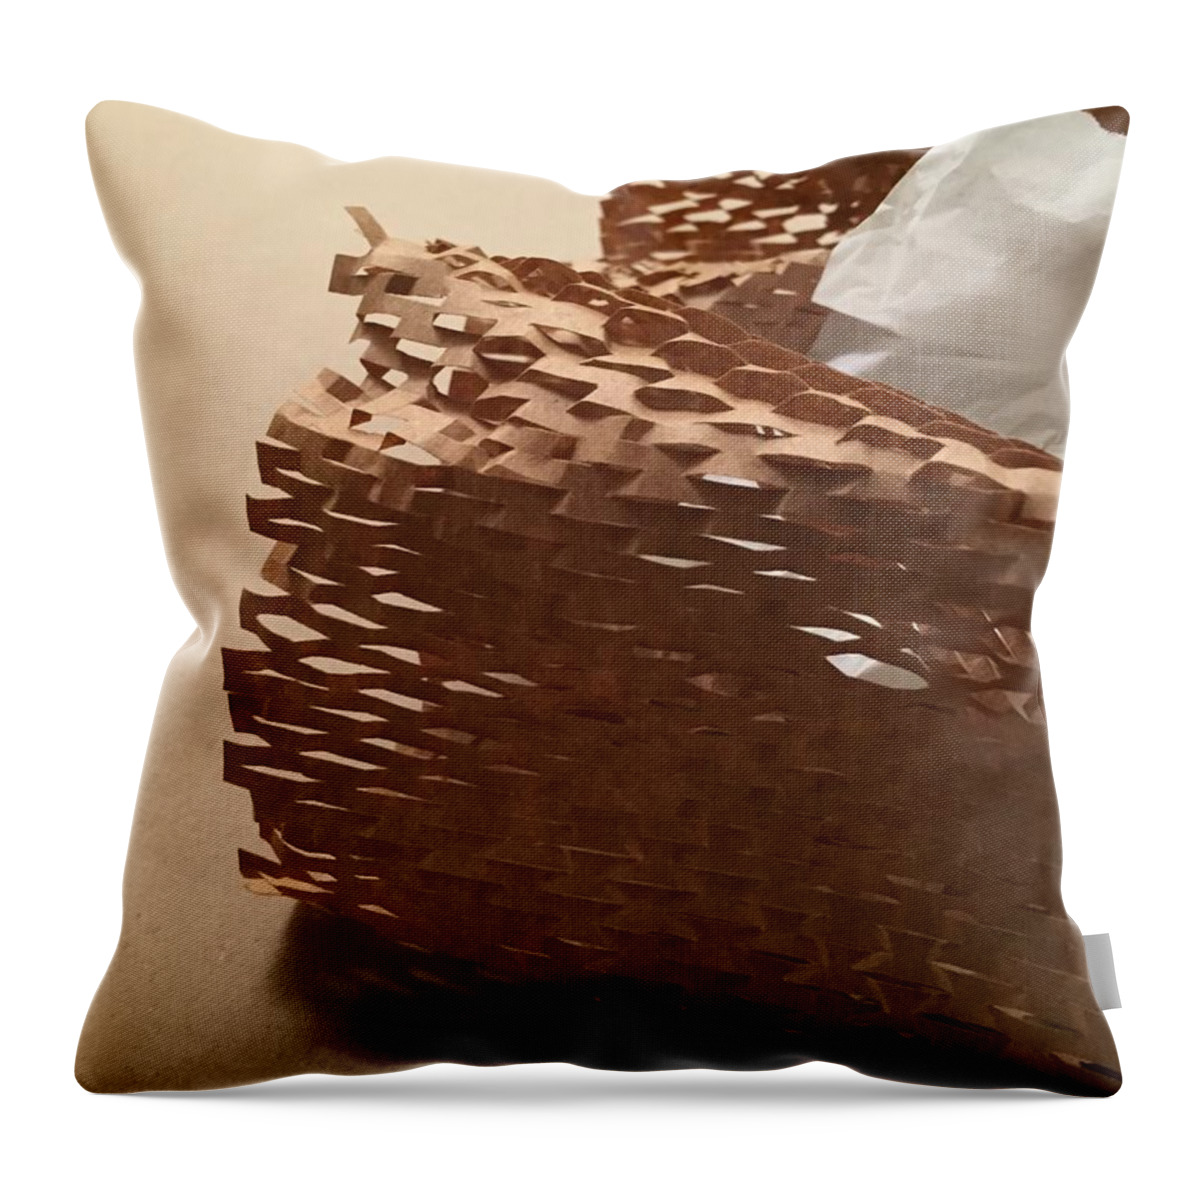 Color Texture Pattern Light Throw Pillow featuring the photograph Paper Series 1-7 by J Doyne Miller